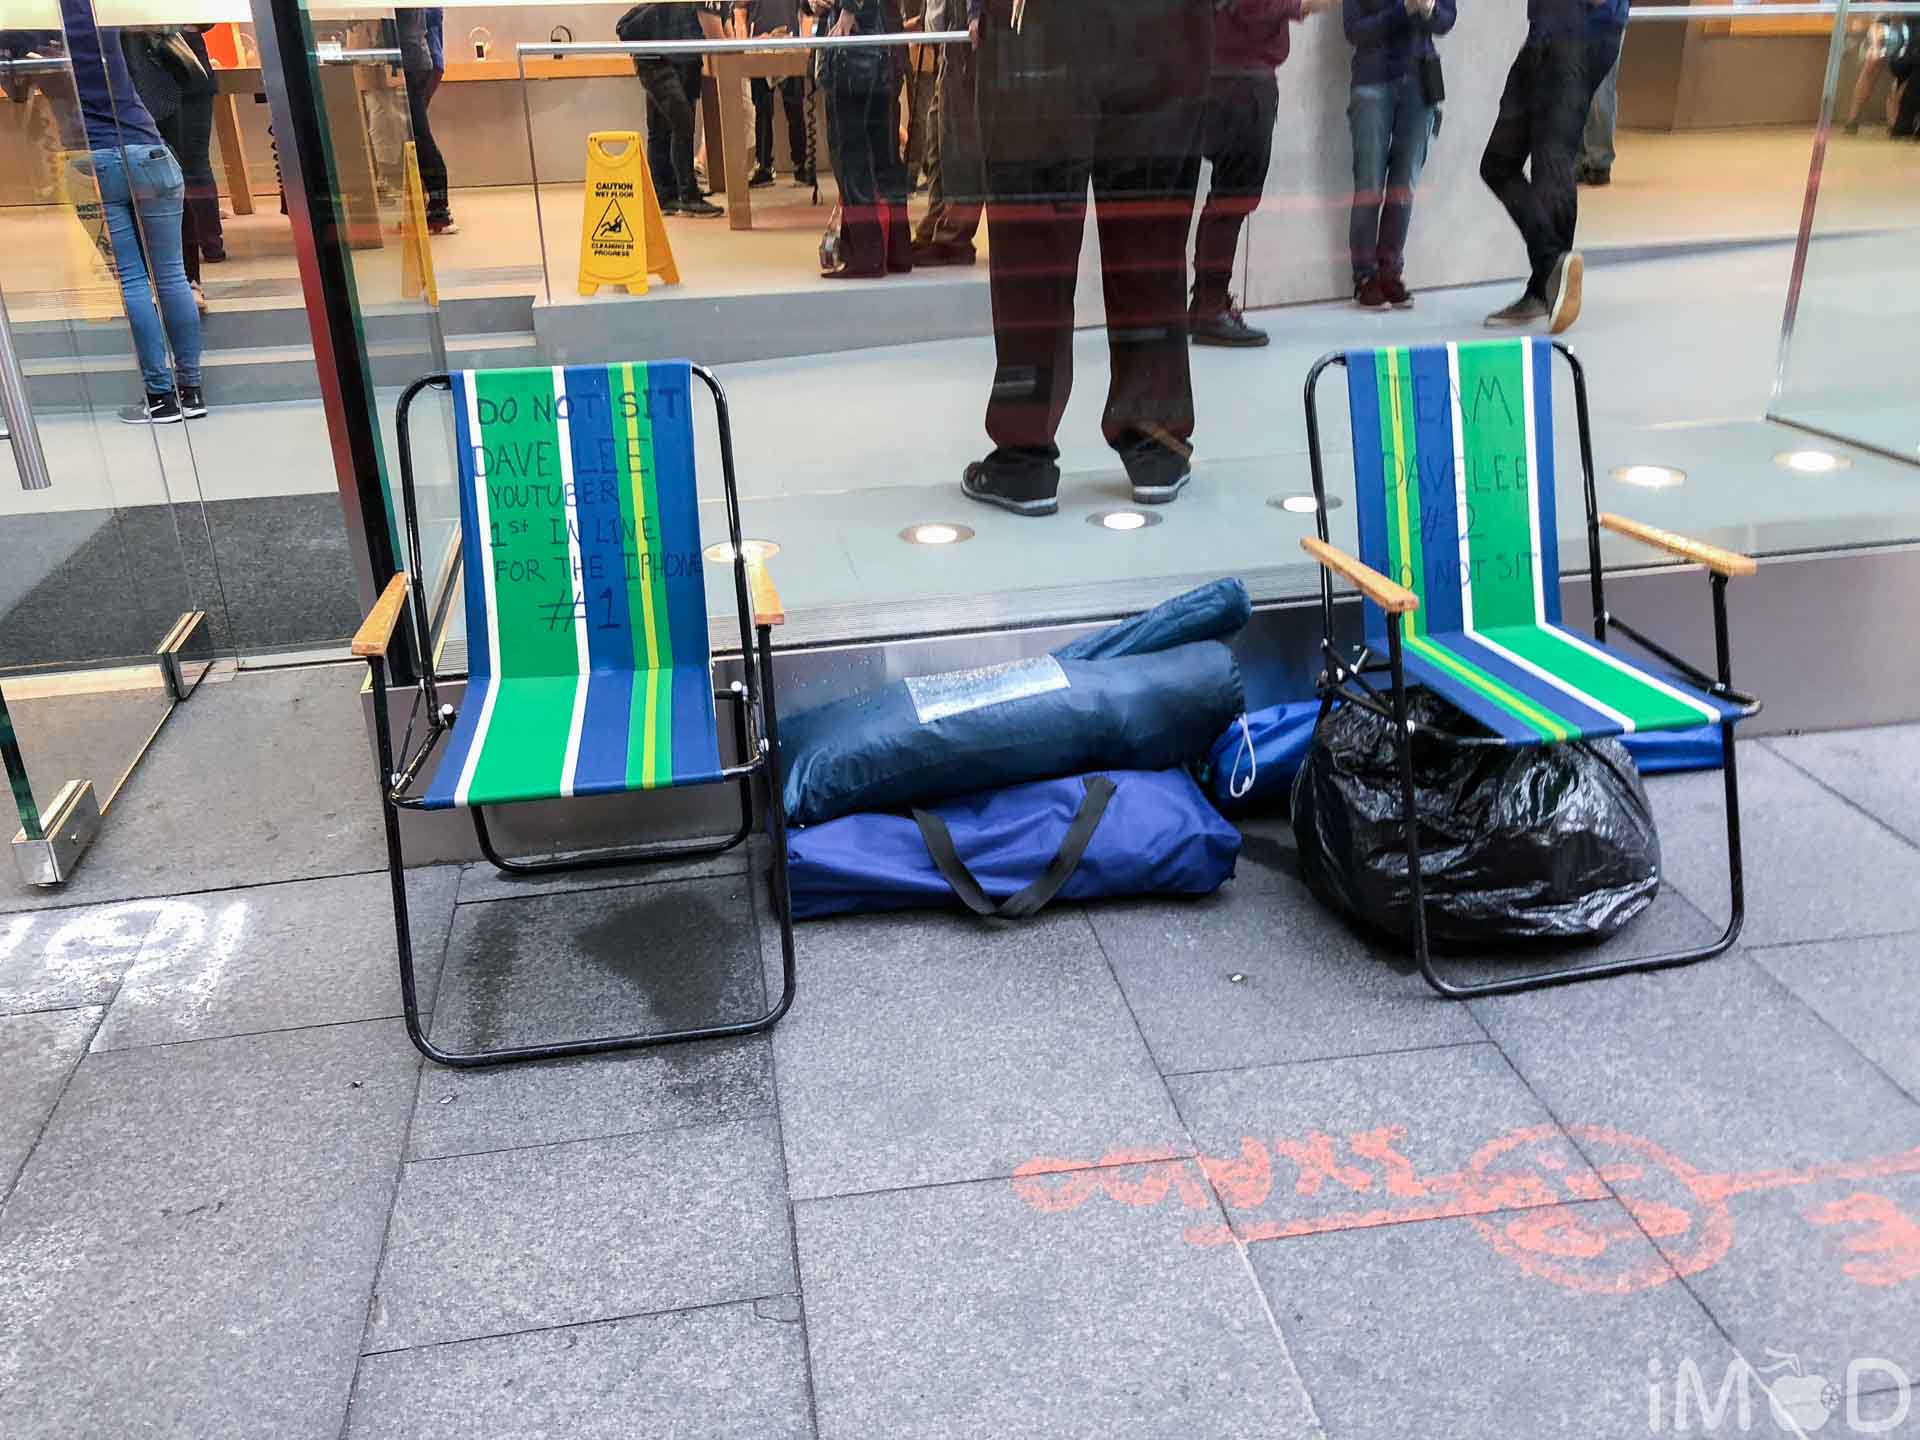 Apple Sydney Day Before Pre Order Iphone X 3747